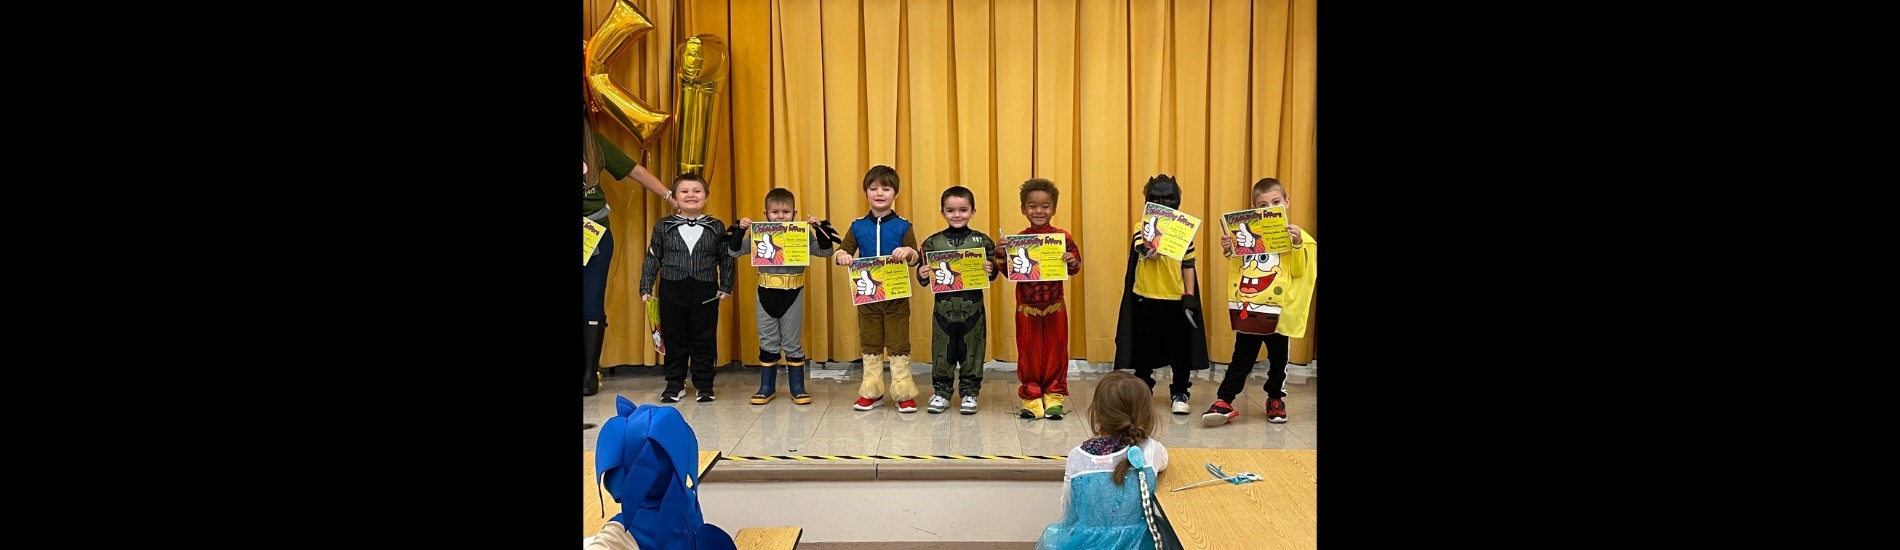 K.T. students pose with their "Outstanding Effort" certificates they recently earned.